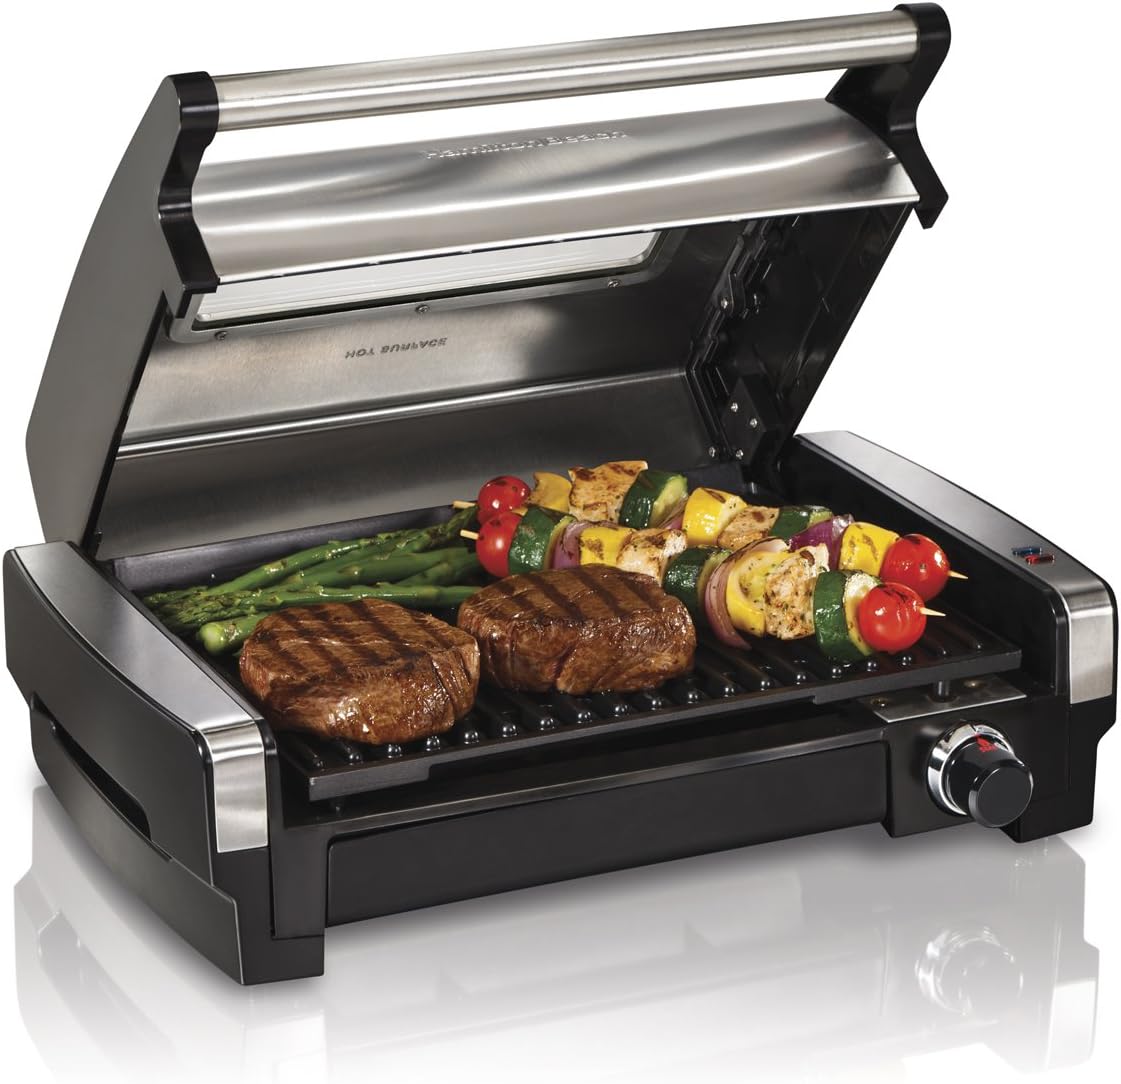 Hamilton Beach Electric Indoor Searing Grill with Viewing Window  Adjustable Temperature Control to 450F, 118 sq. in. Surface Serves 6, Removable Nonstick Grate, Stainless Steel